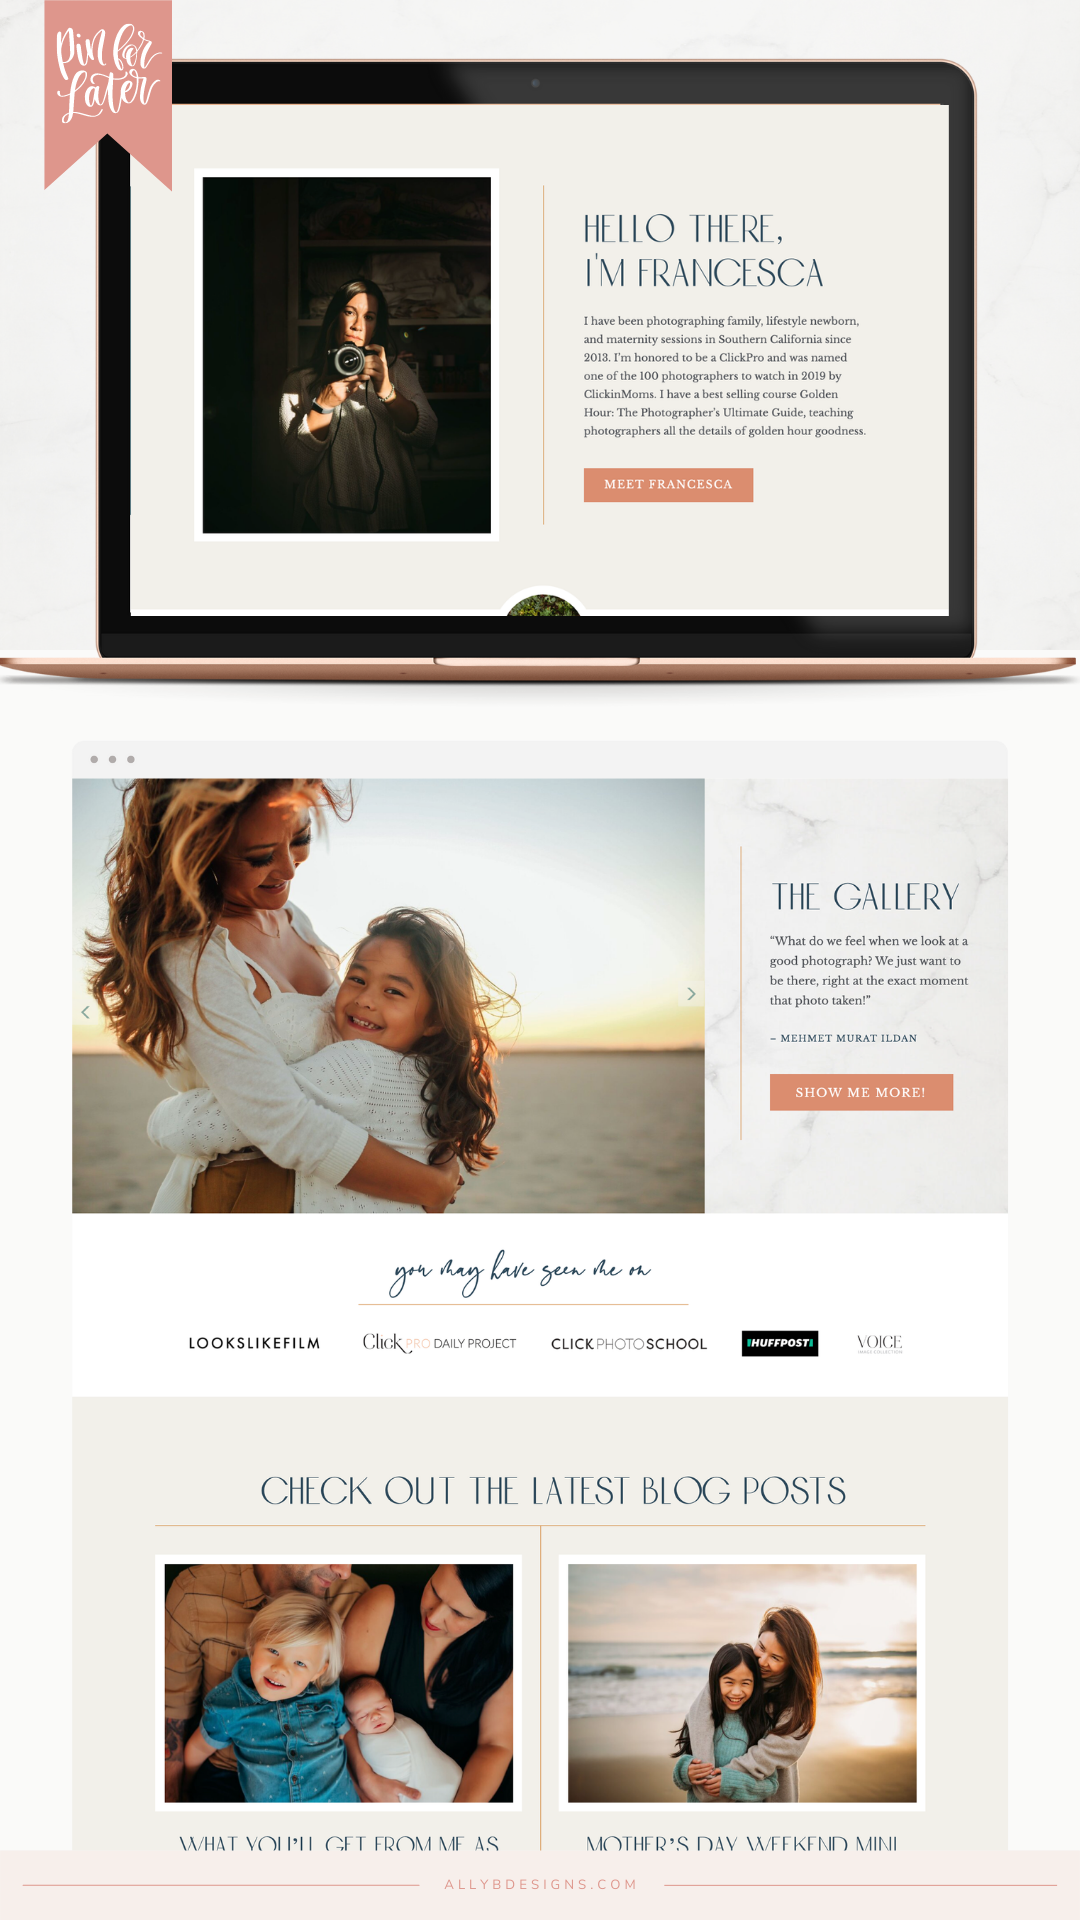 A Portrait Photography Website Client Launch: Francesca Marchese Photography. Branding and Website Design By Ally B Designs